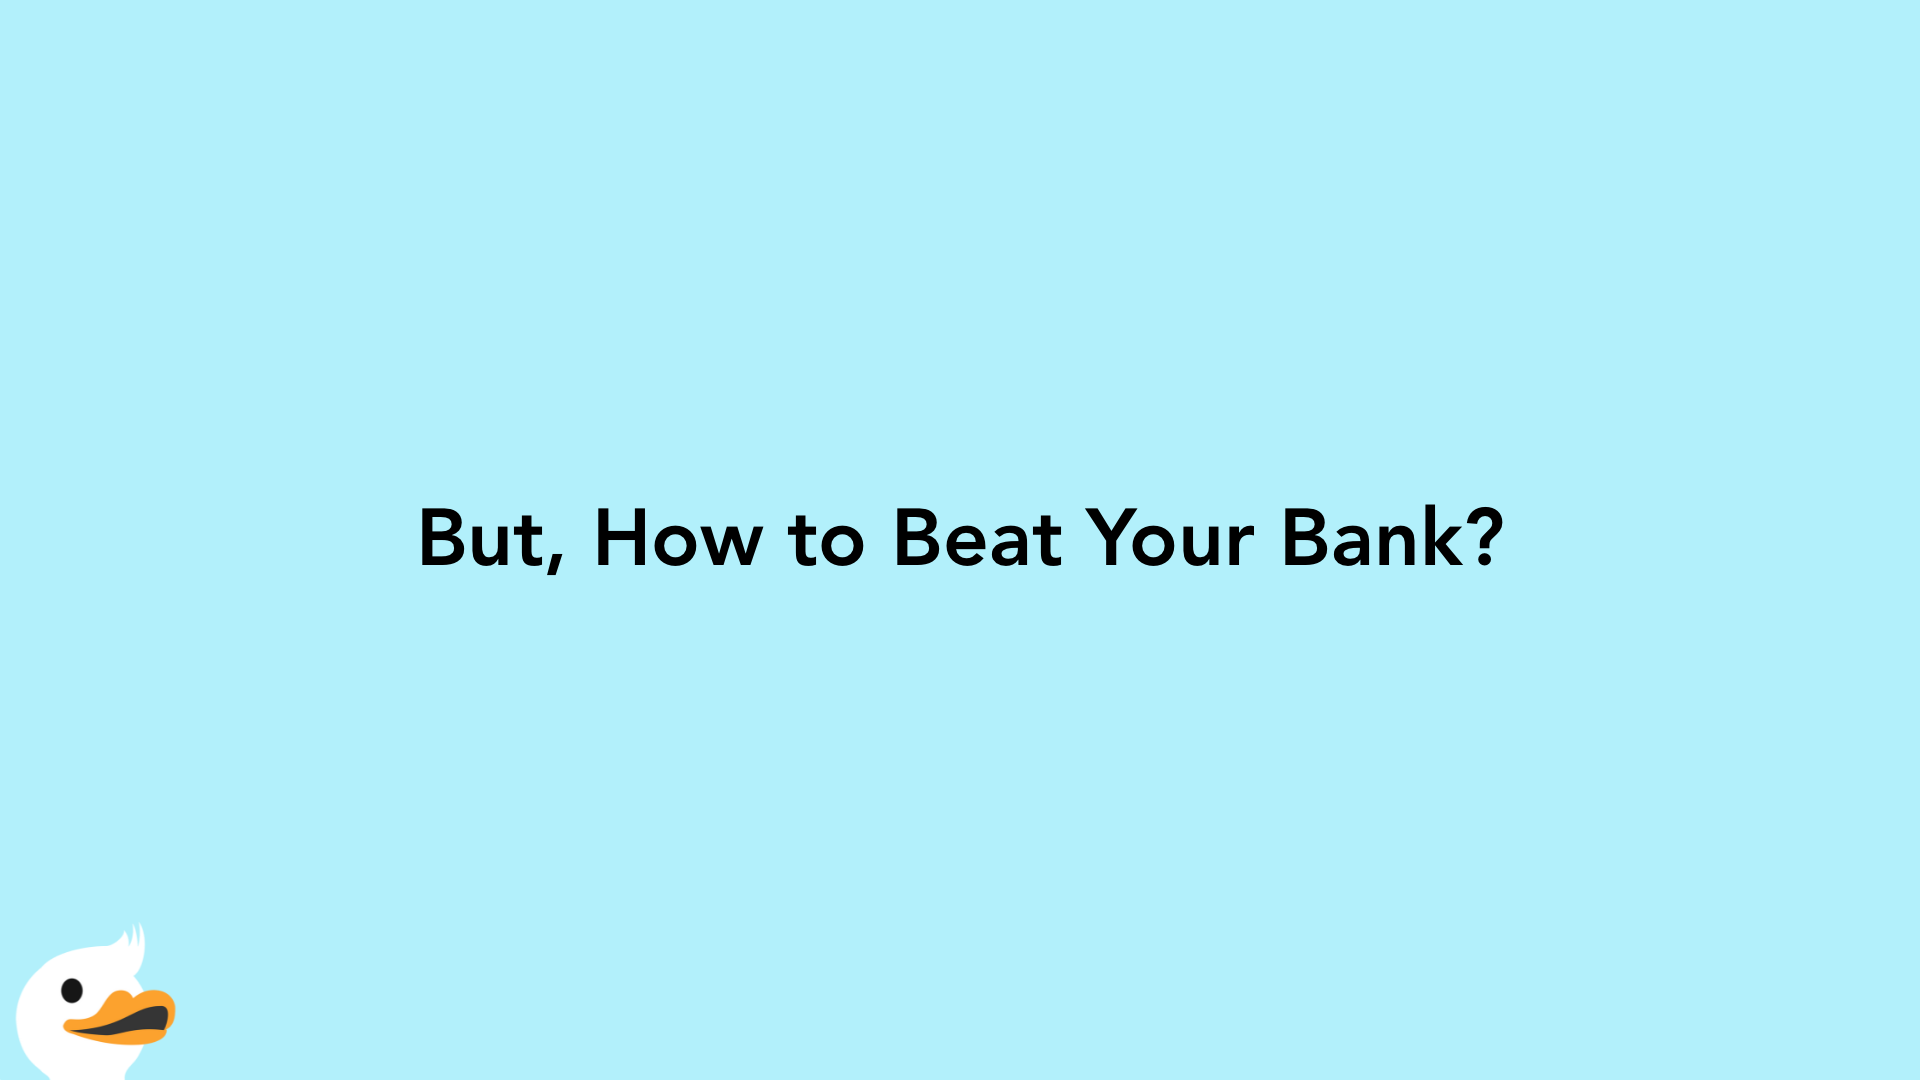 But, How to Beat Your Bank?